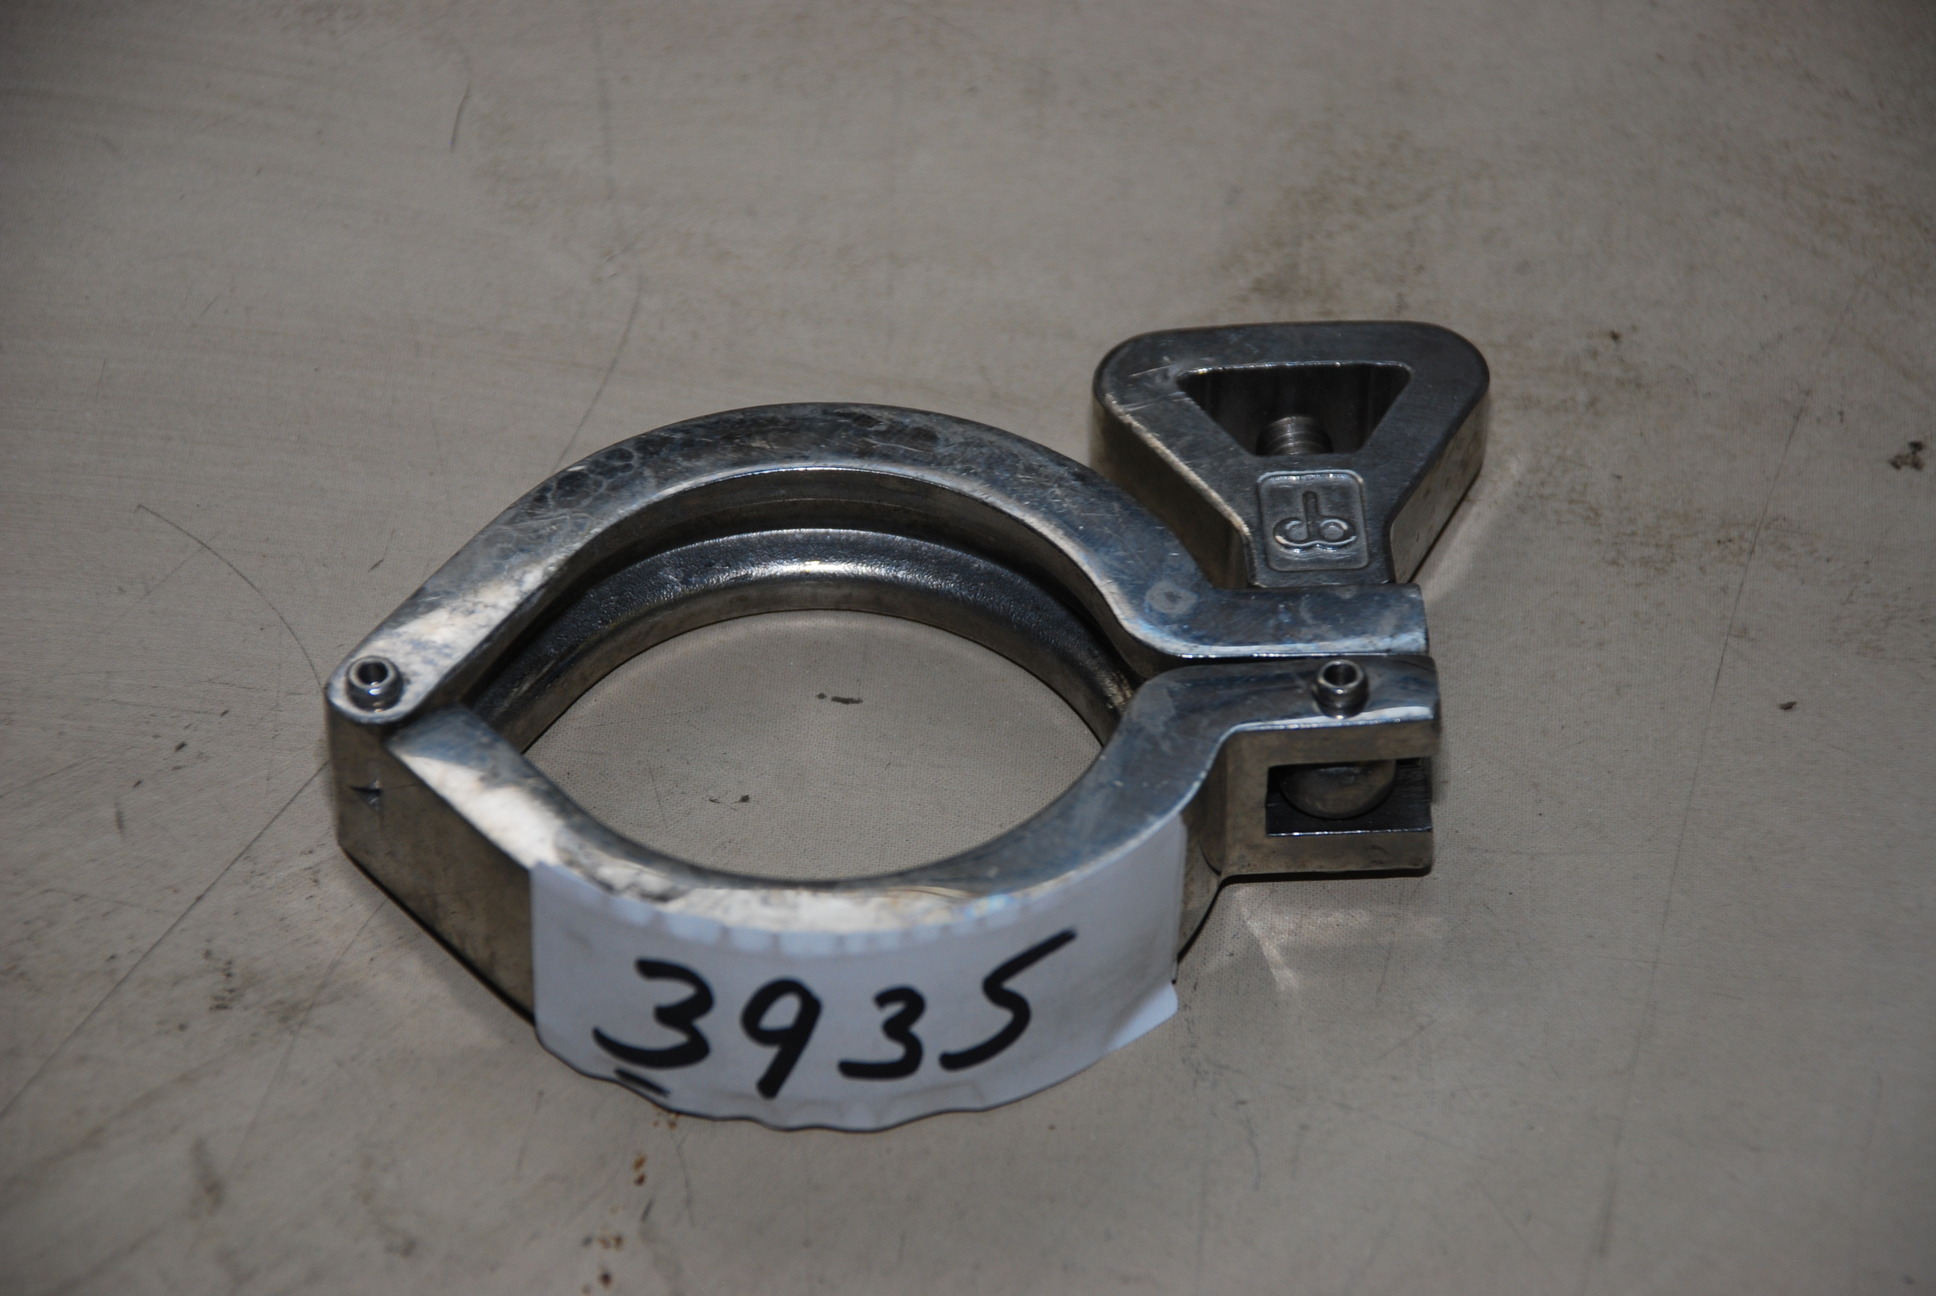 USED,2 1/2 Sanitary Stainless Steel Quick-Clamp Tube Fitting INV=3935 | eBay1936 x 1296